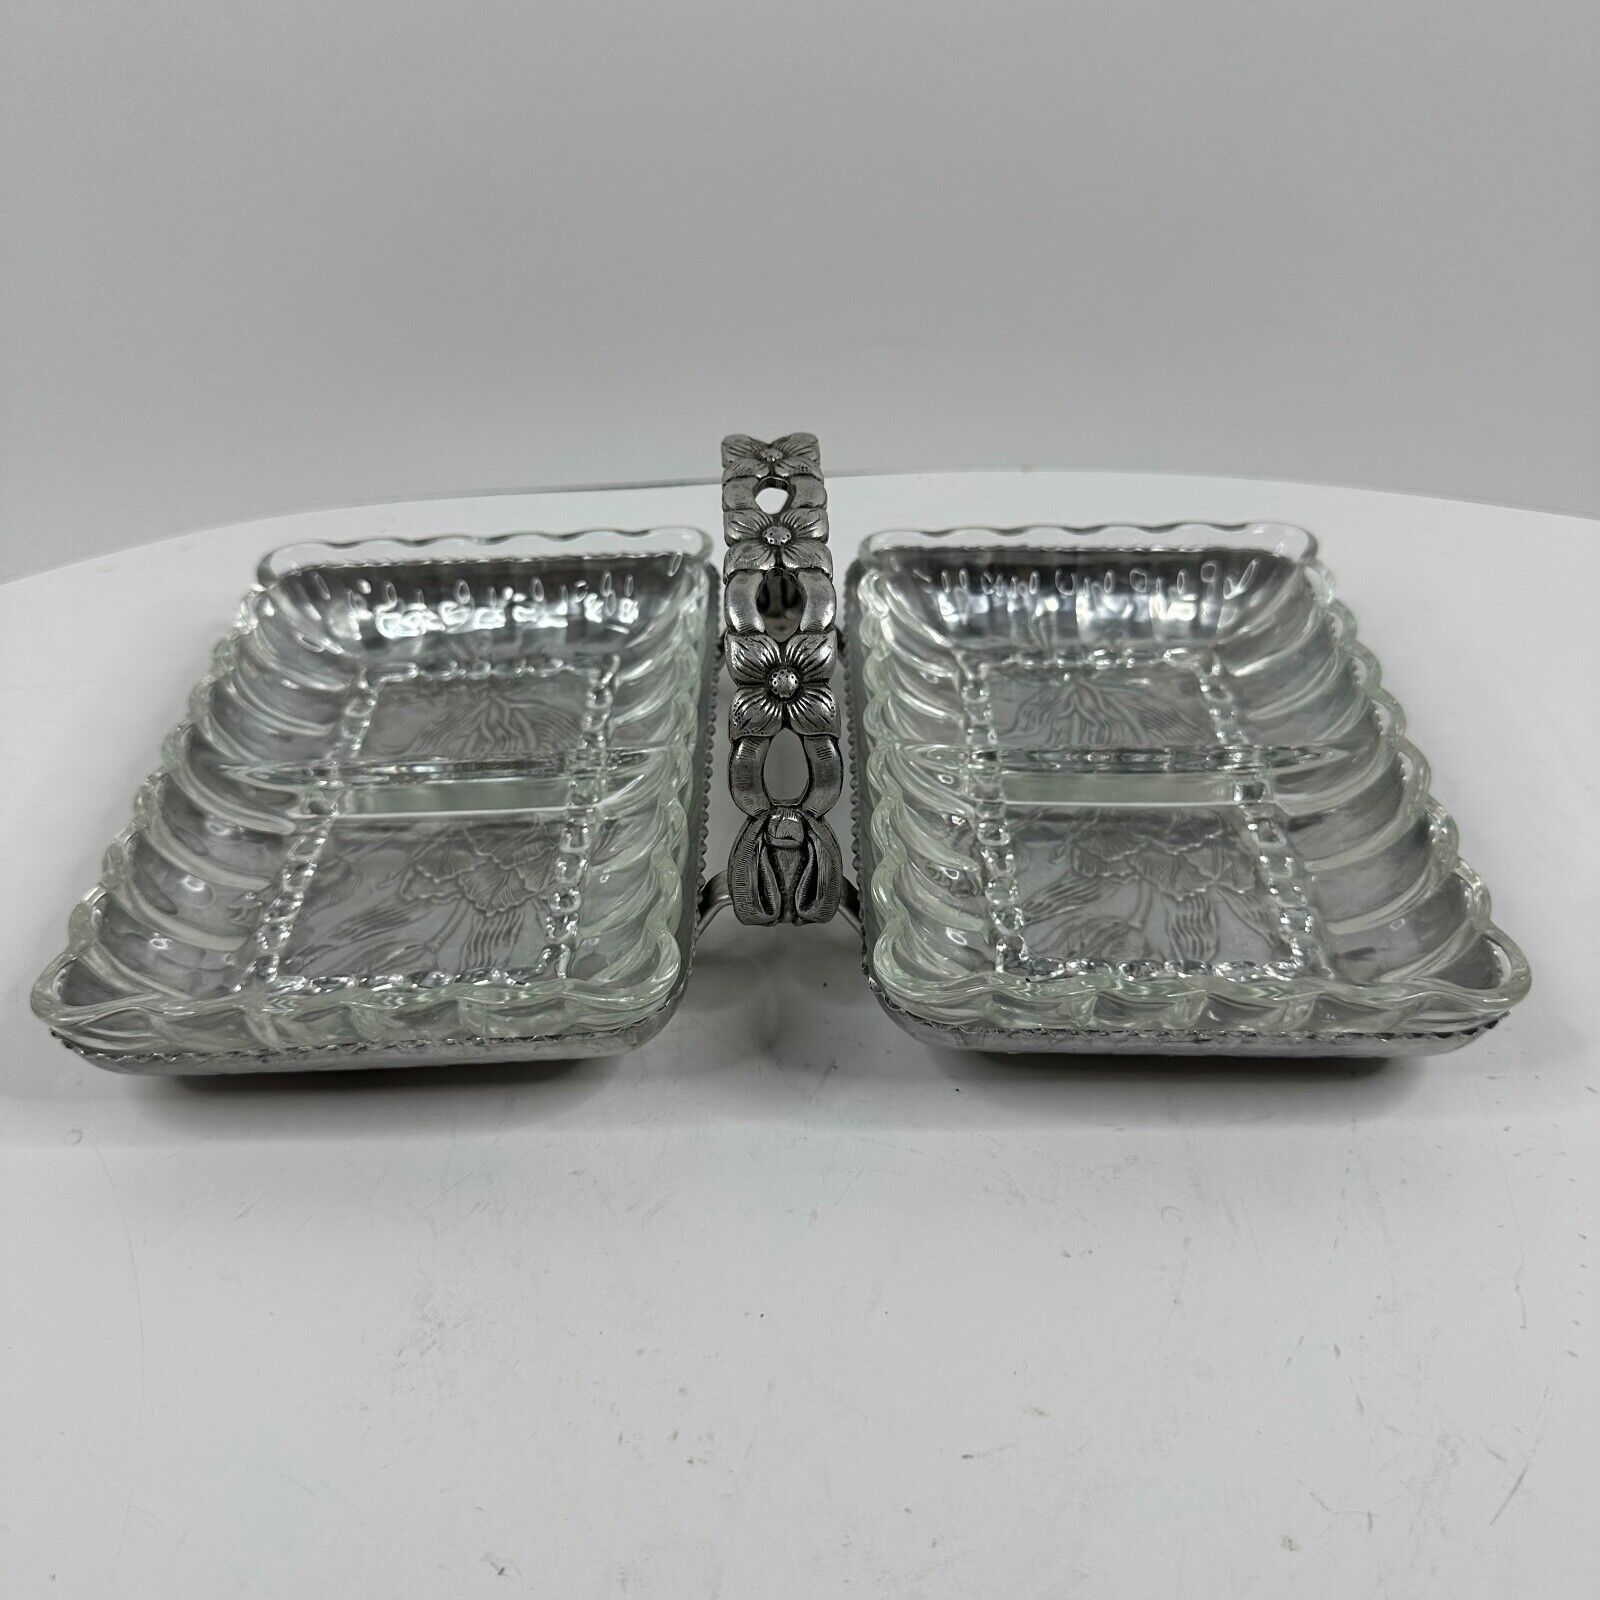 Hammered Aluminum Tulip Design w/2 Pressed Glass 2 Section Relish Serving Dishes